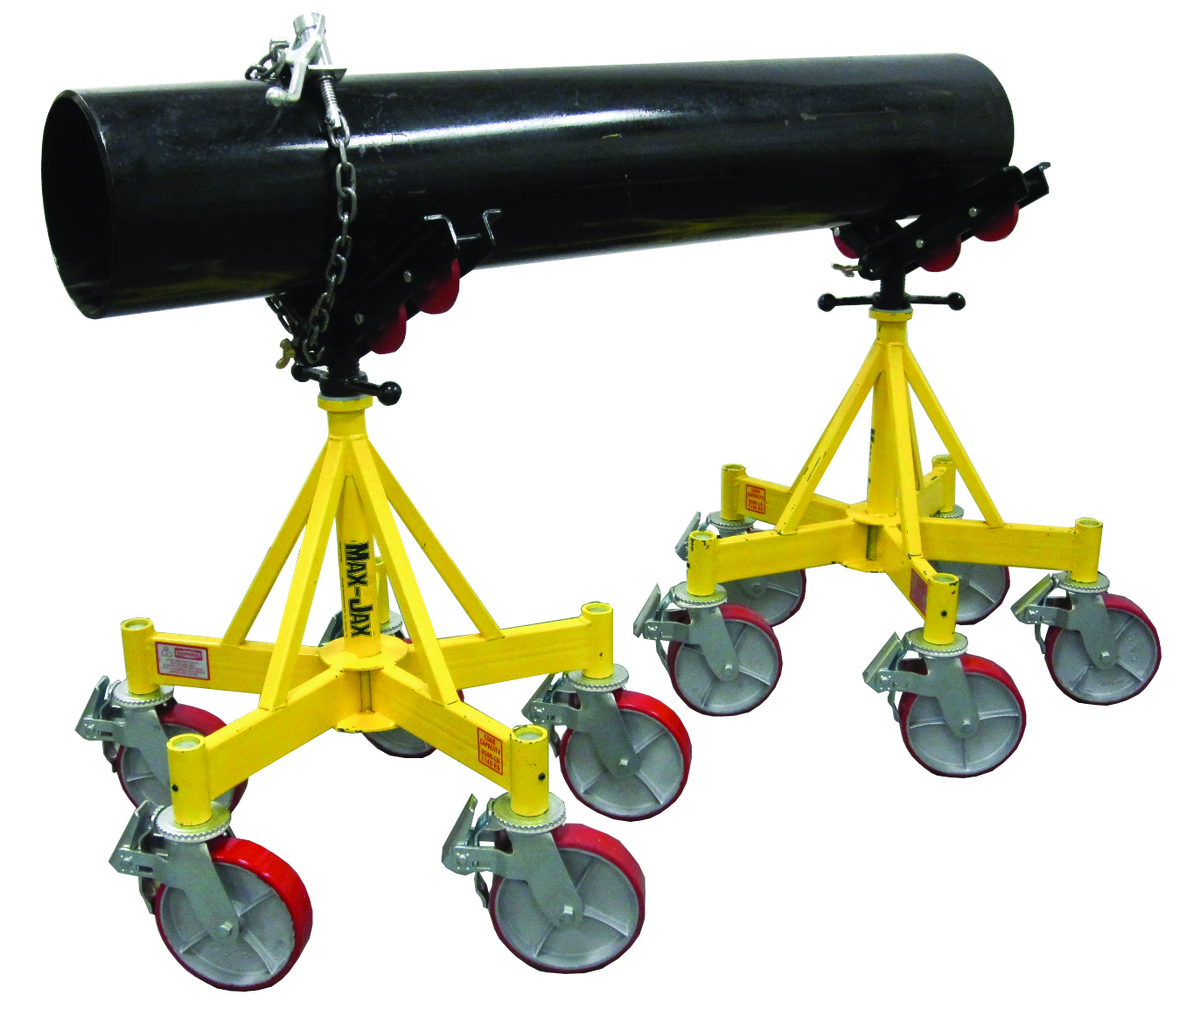 Max Jax* Kit No. 1 - includes basic stand, roller head kit & casters